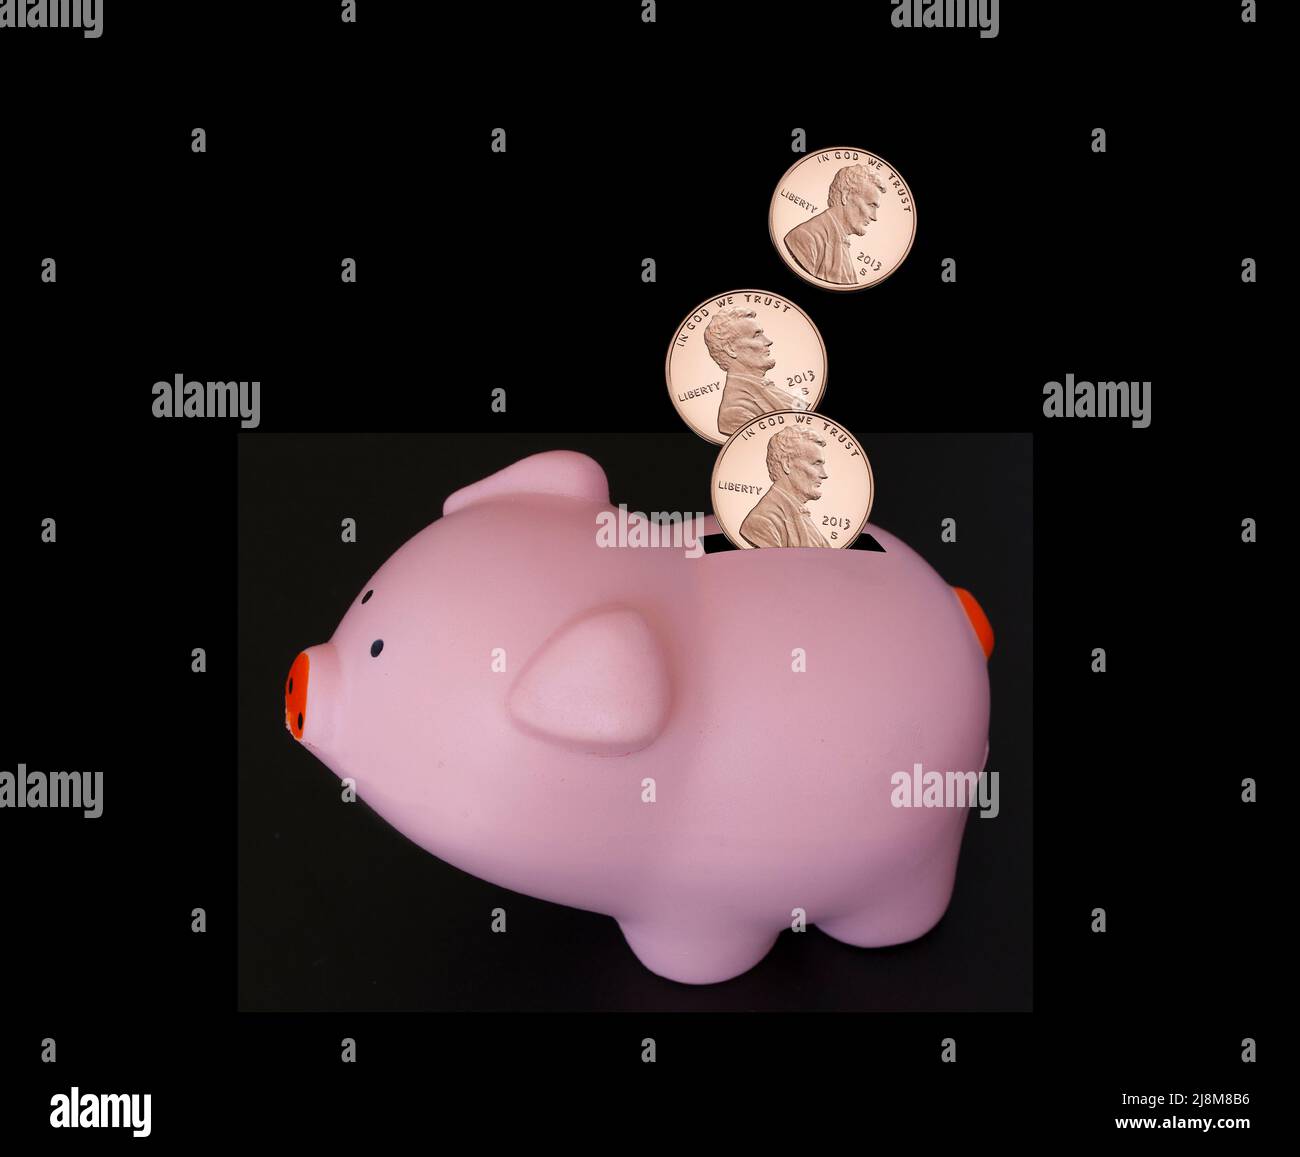 USA cute Piggy Bank Savings Money. US One Cent coins falling into pink piggy bank isolated on black background. Stock Photo